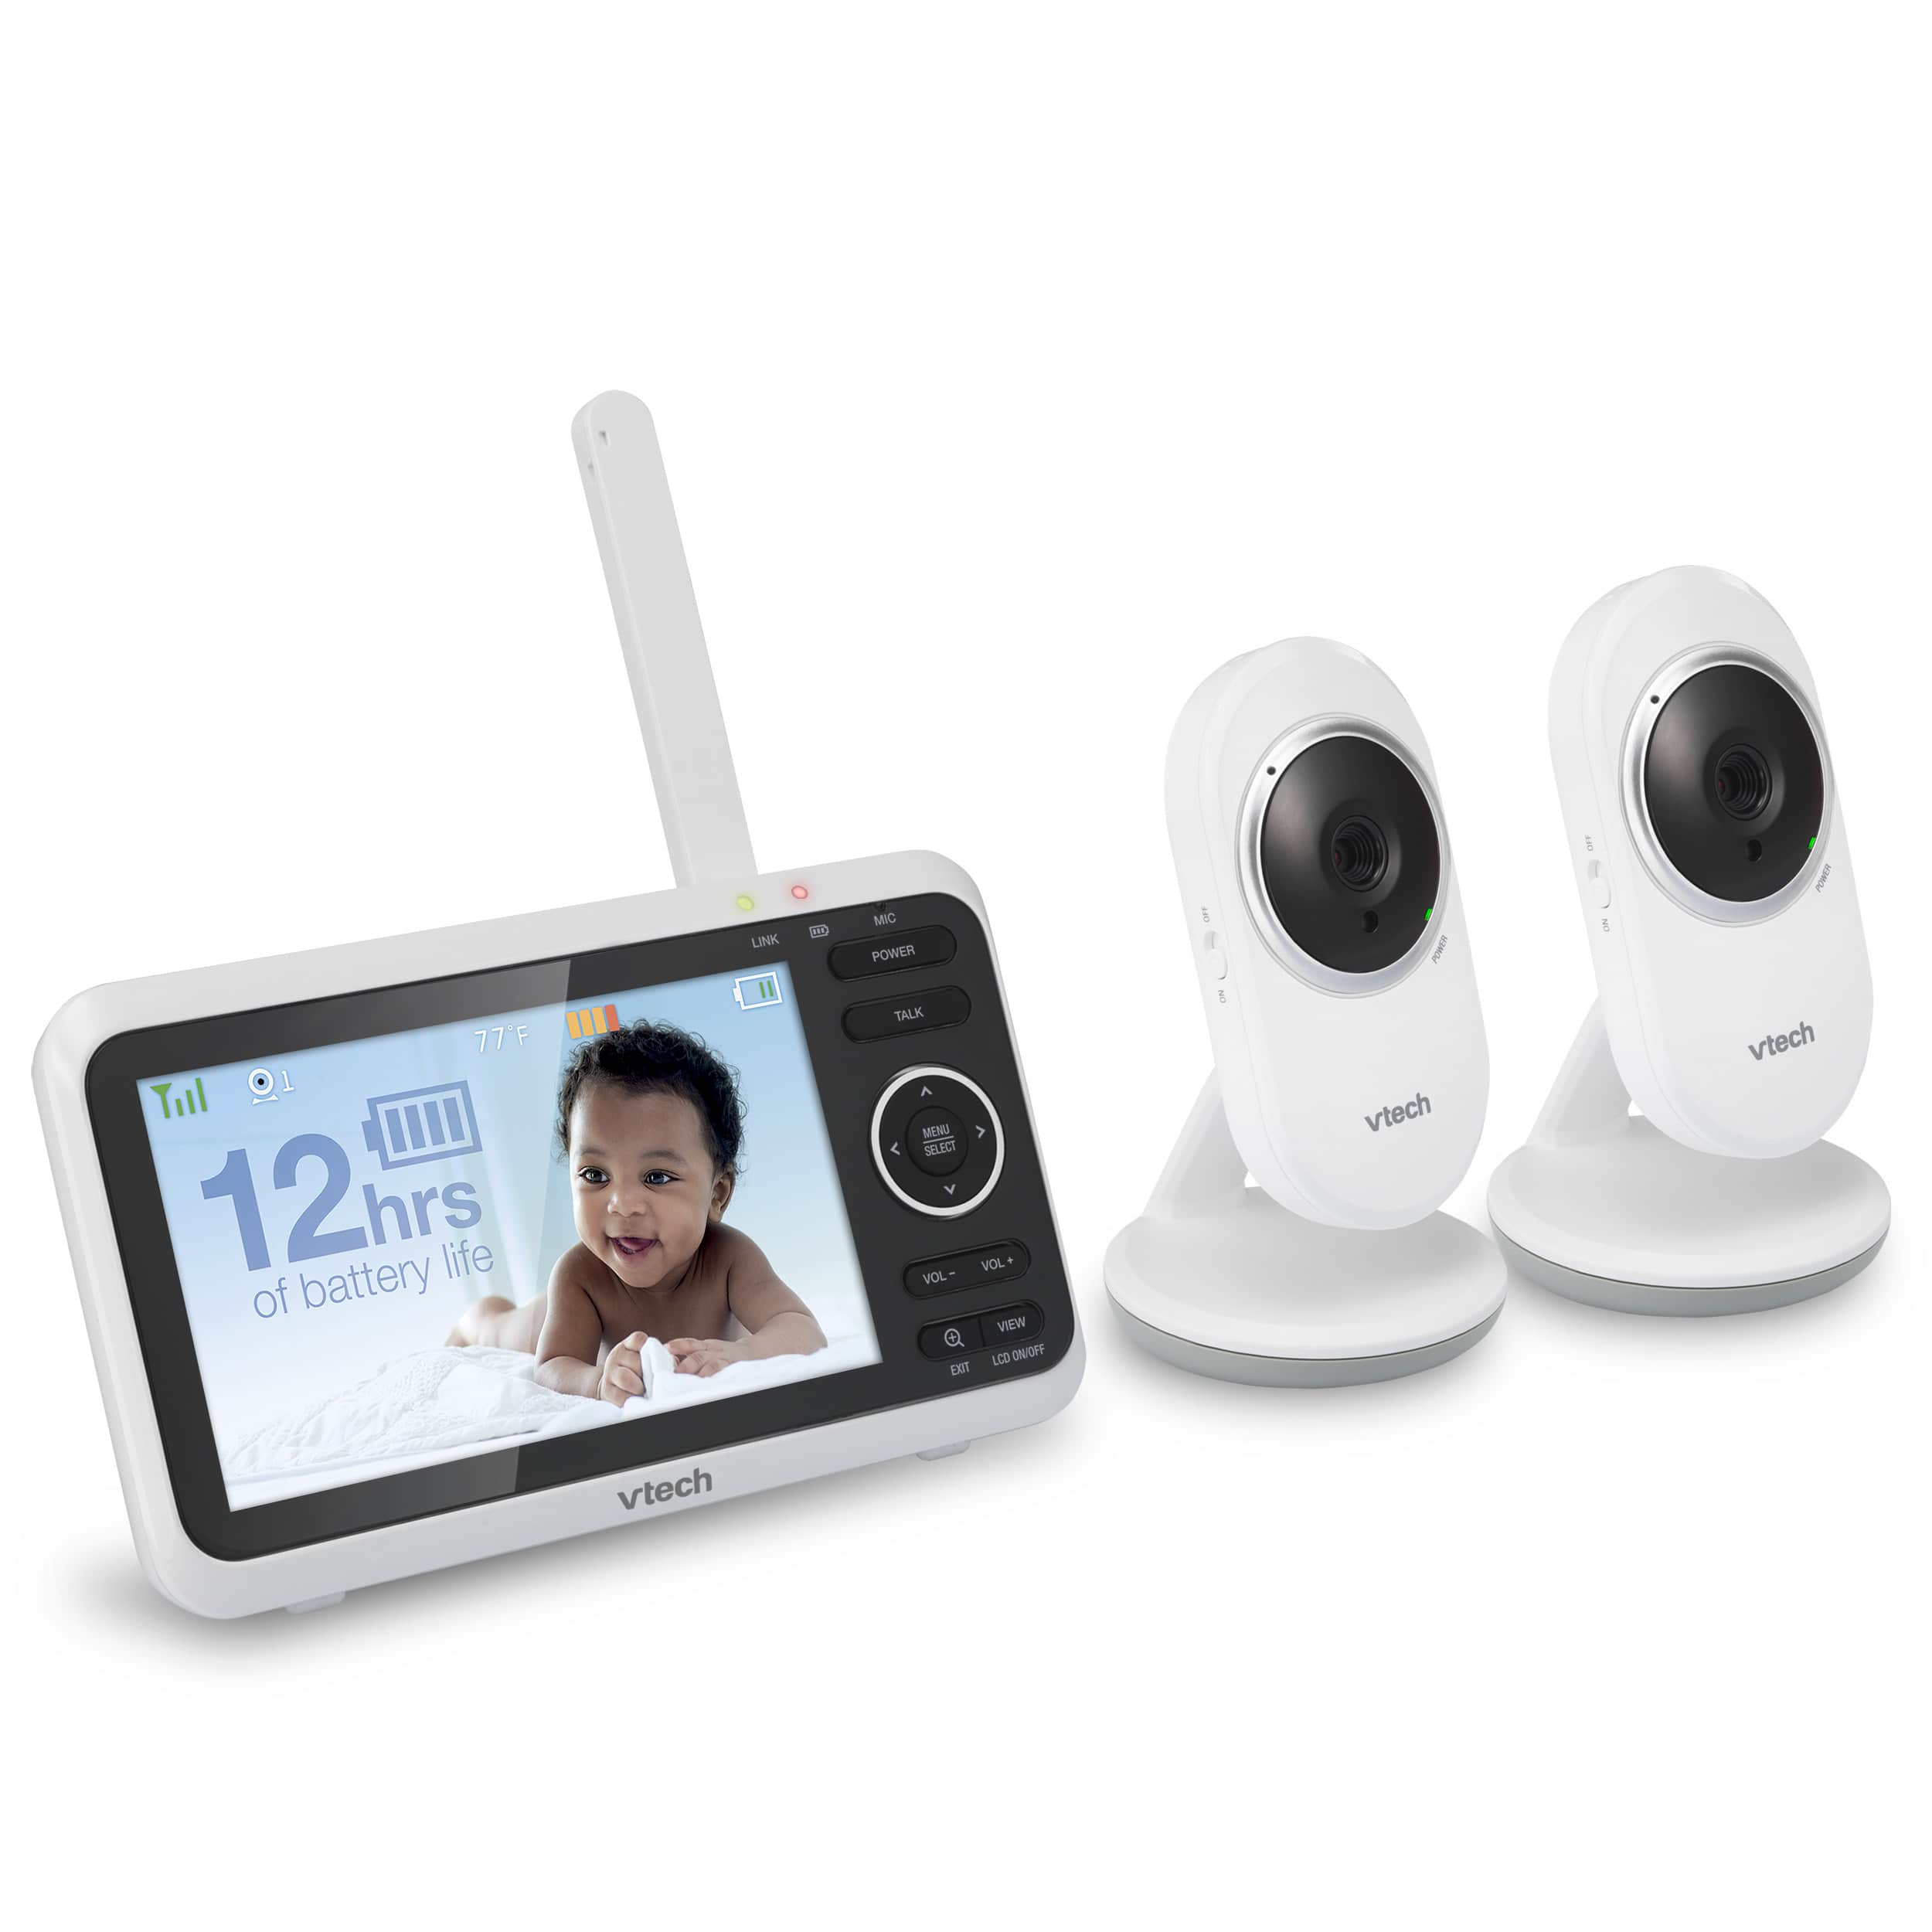 White VTech VM350 5” Digital Video Baby Monitor with Full-Color and Automatic Night Vision 